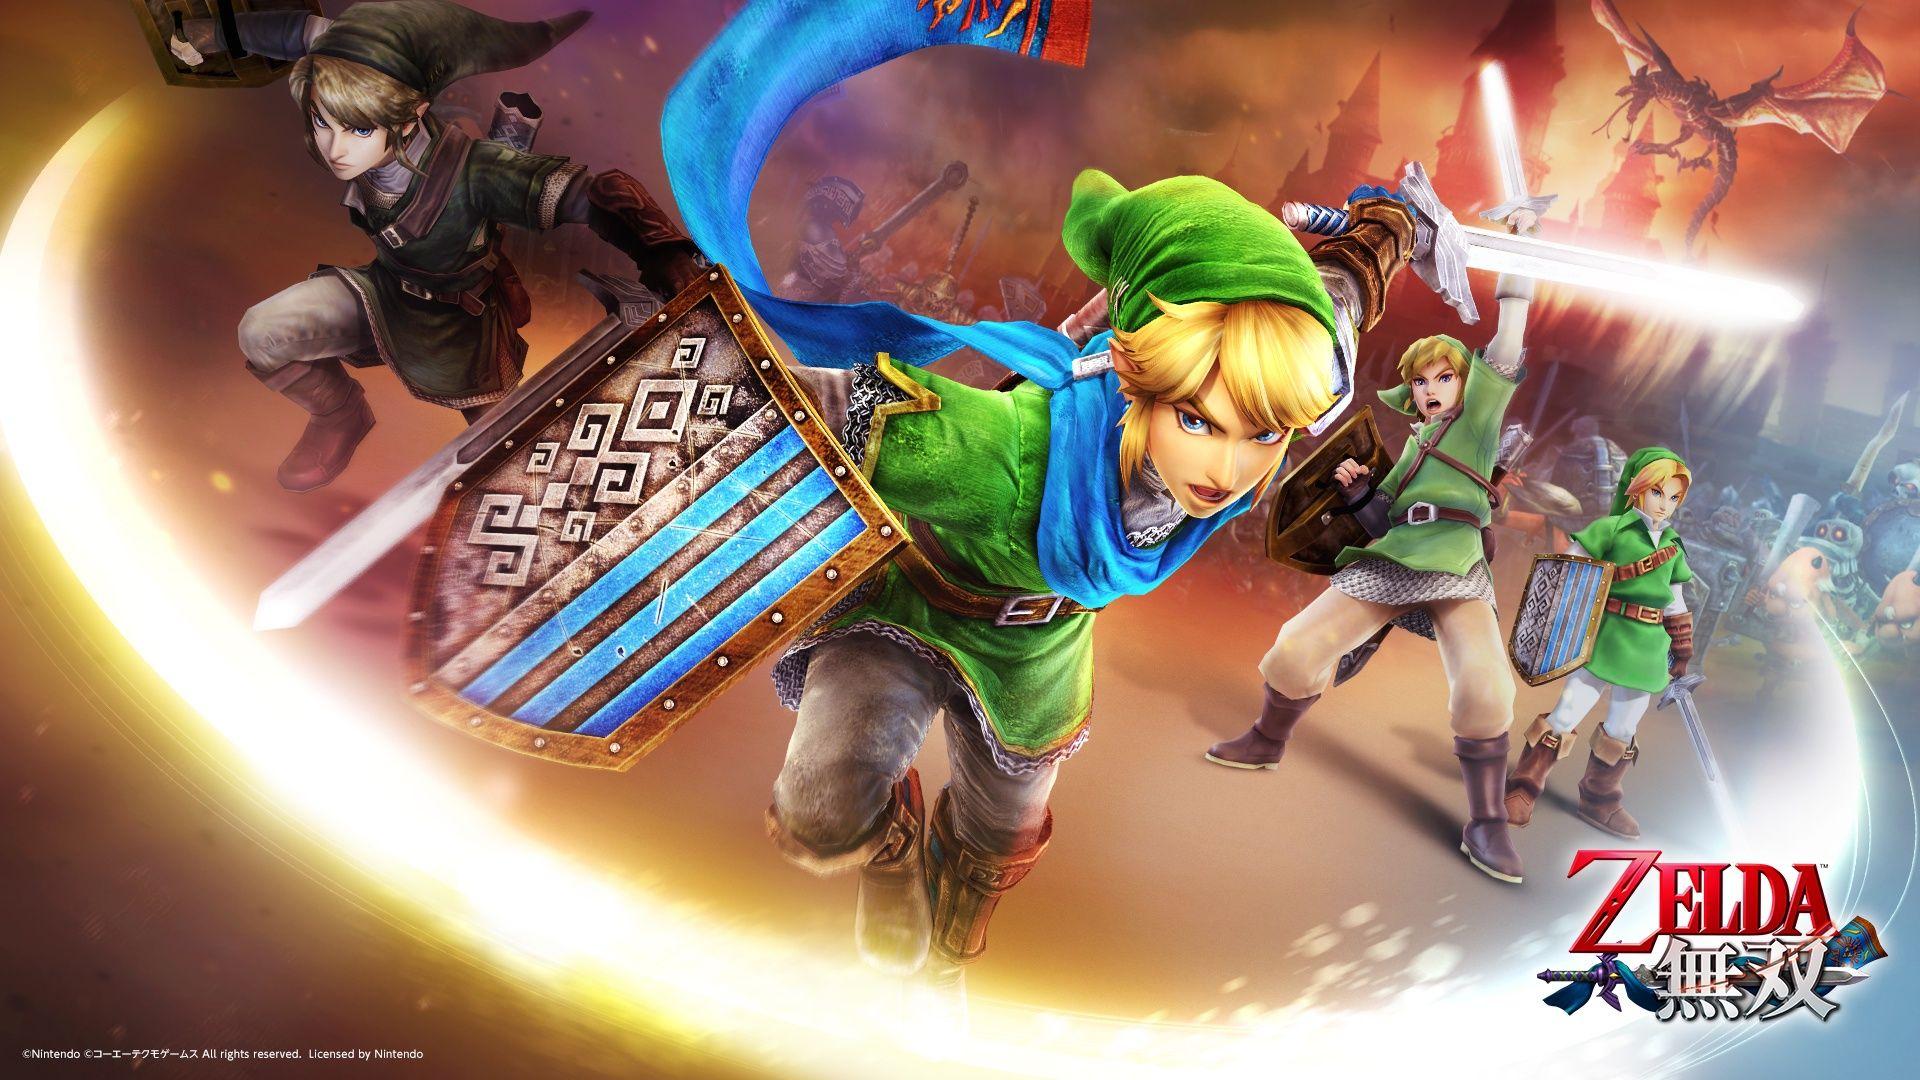 Koei Tecmo Releases Awesome Hyrule Warriors Wallpaper to Celebrate